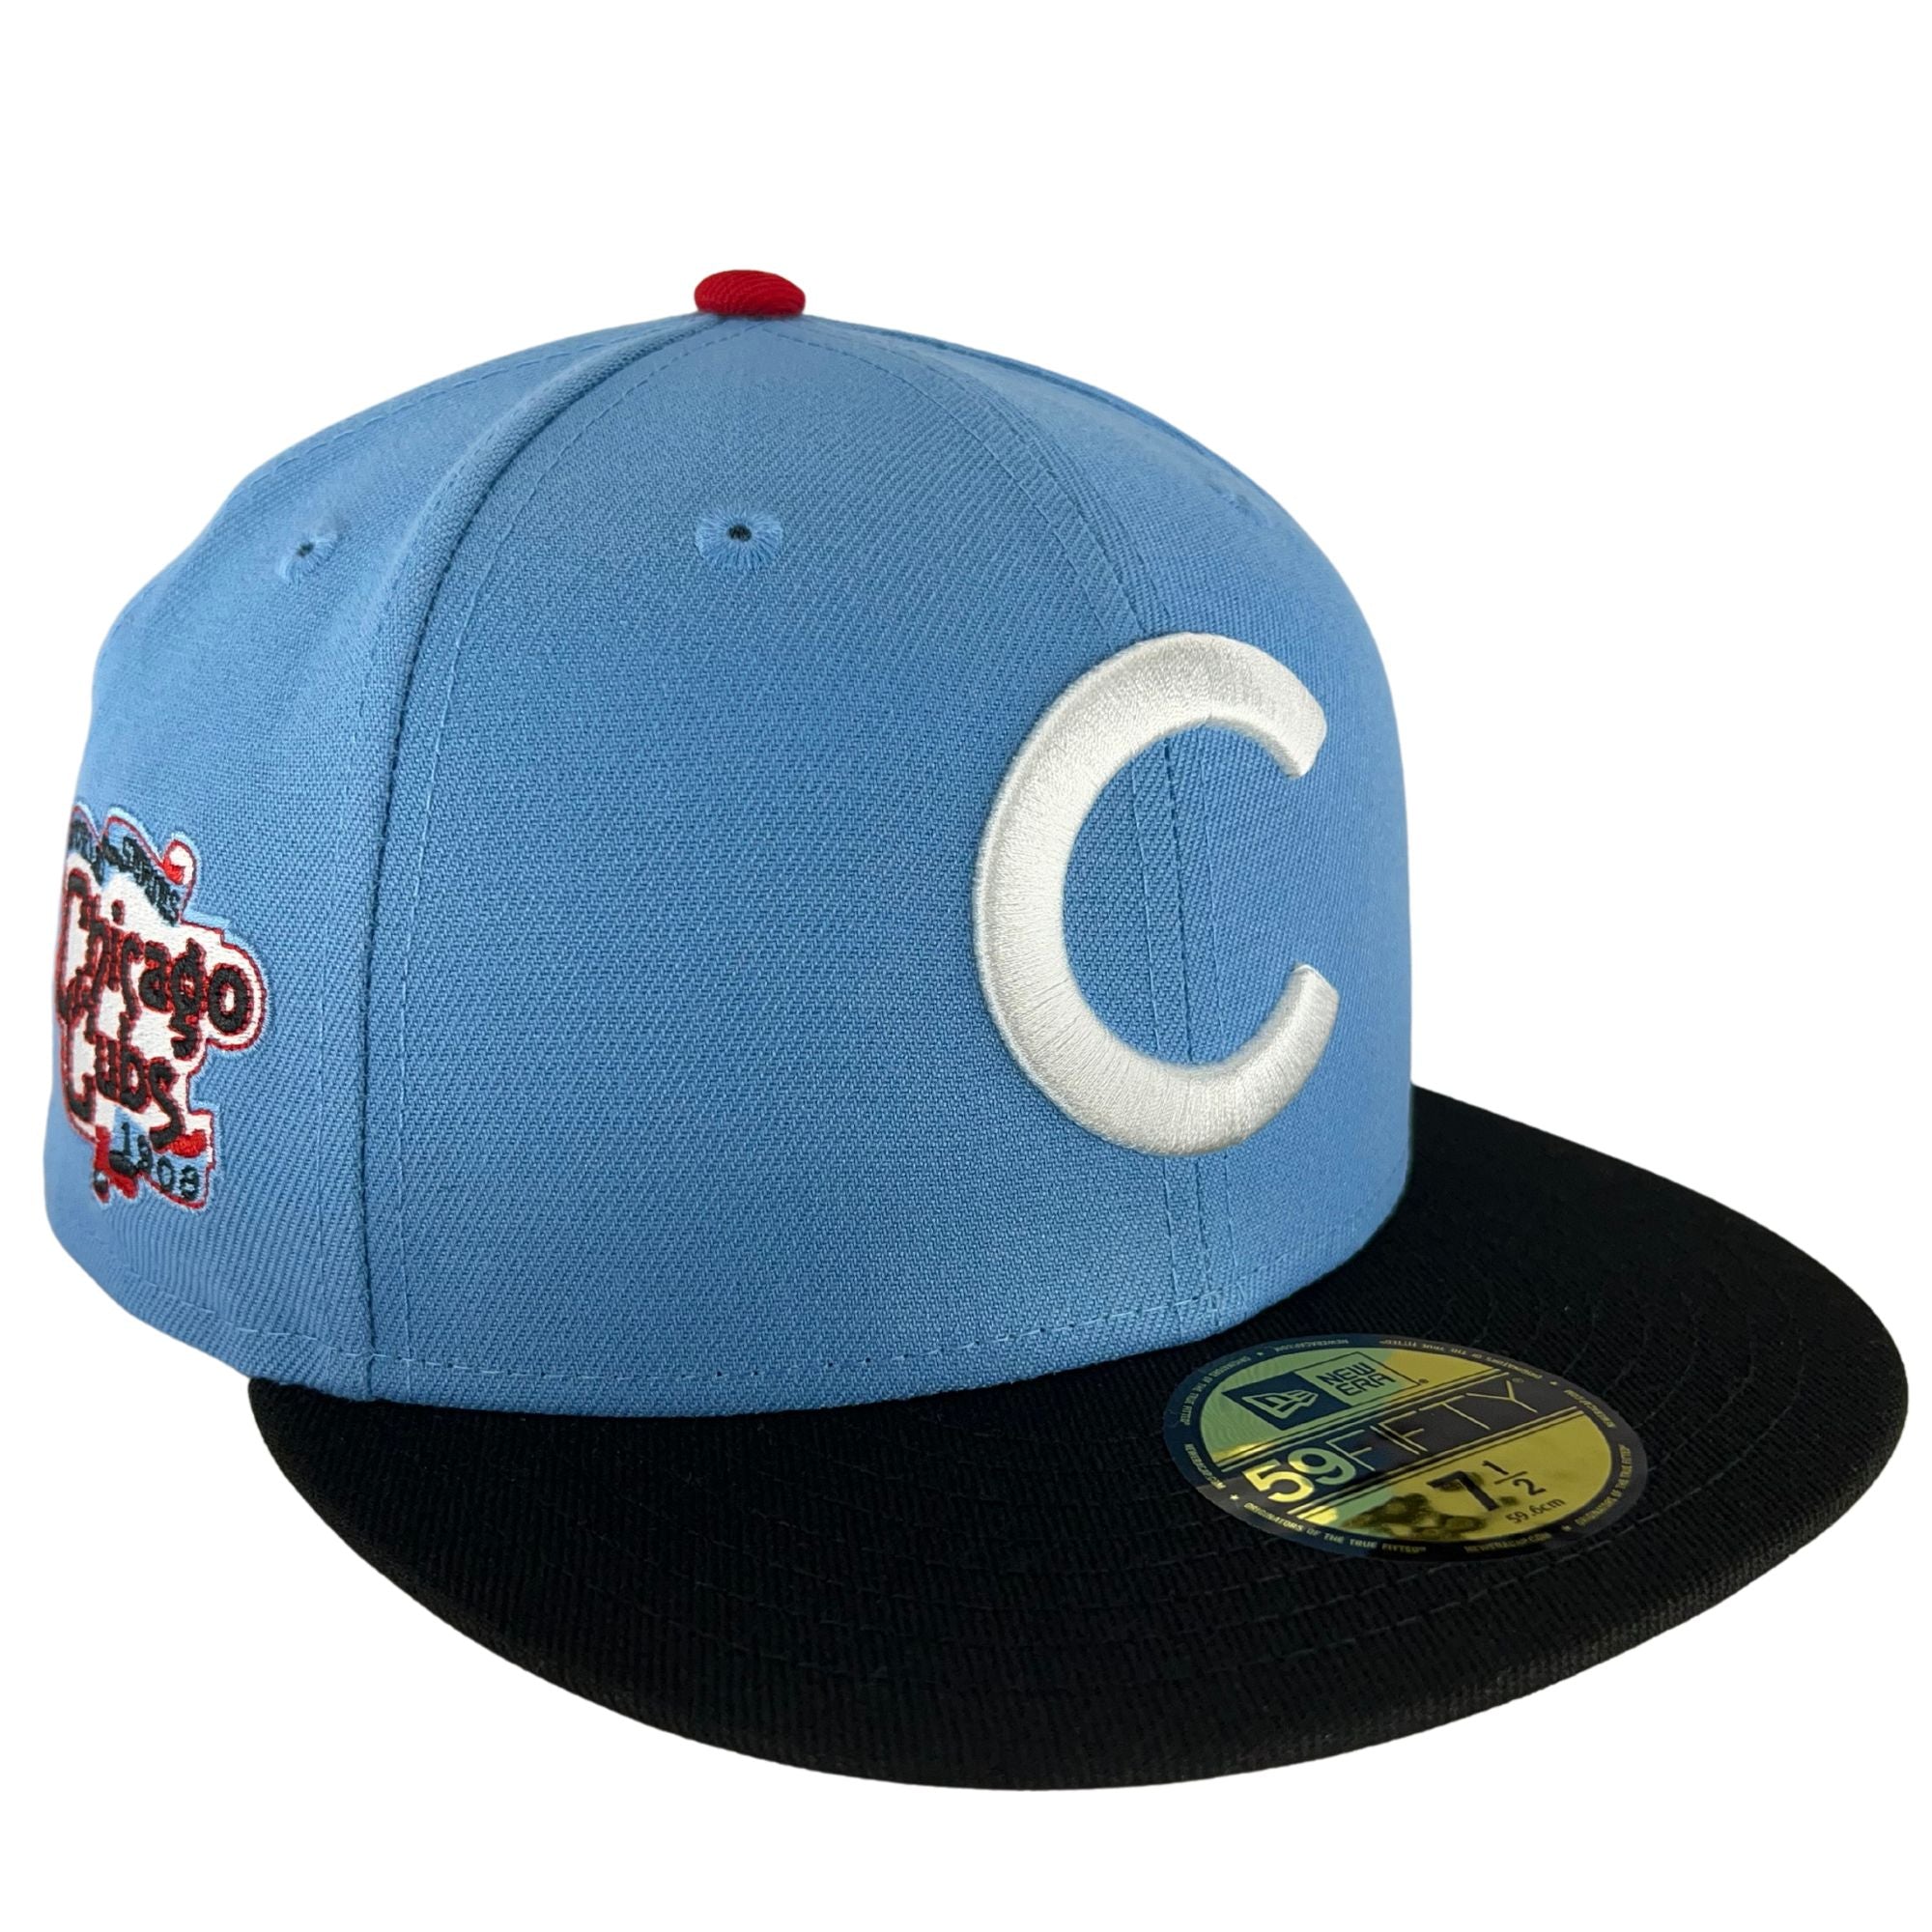 Boston Red Sox Green/Teal New Era 59FIFTY Fitted Hat - Clark Street Sports